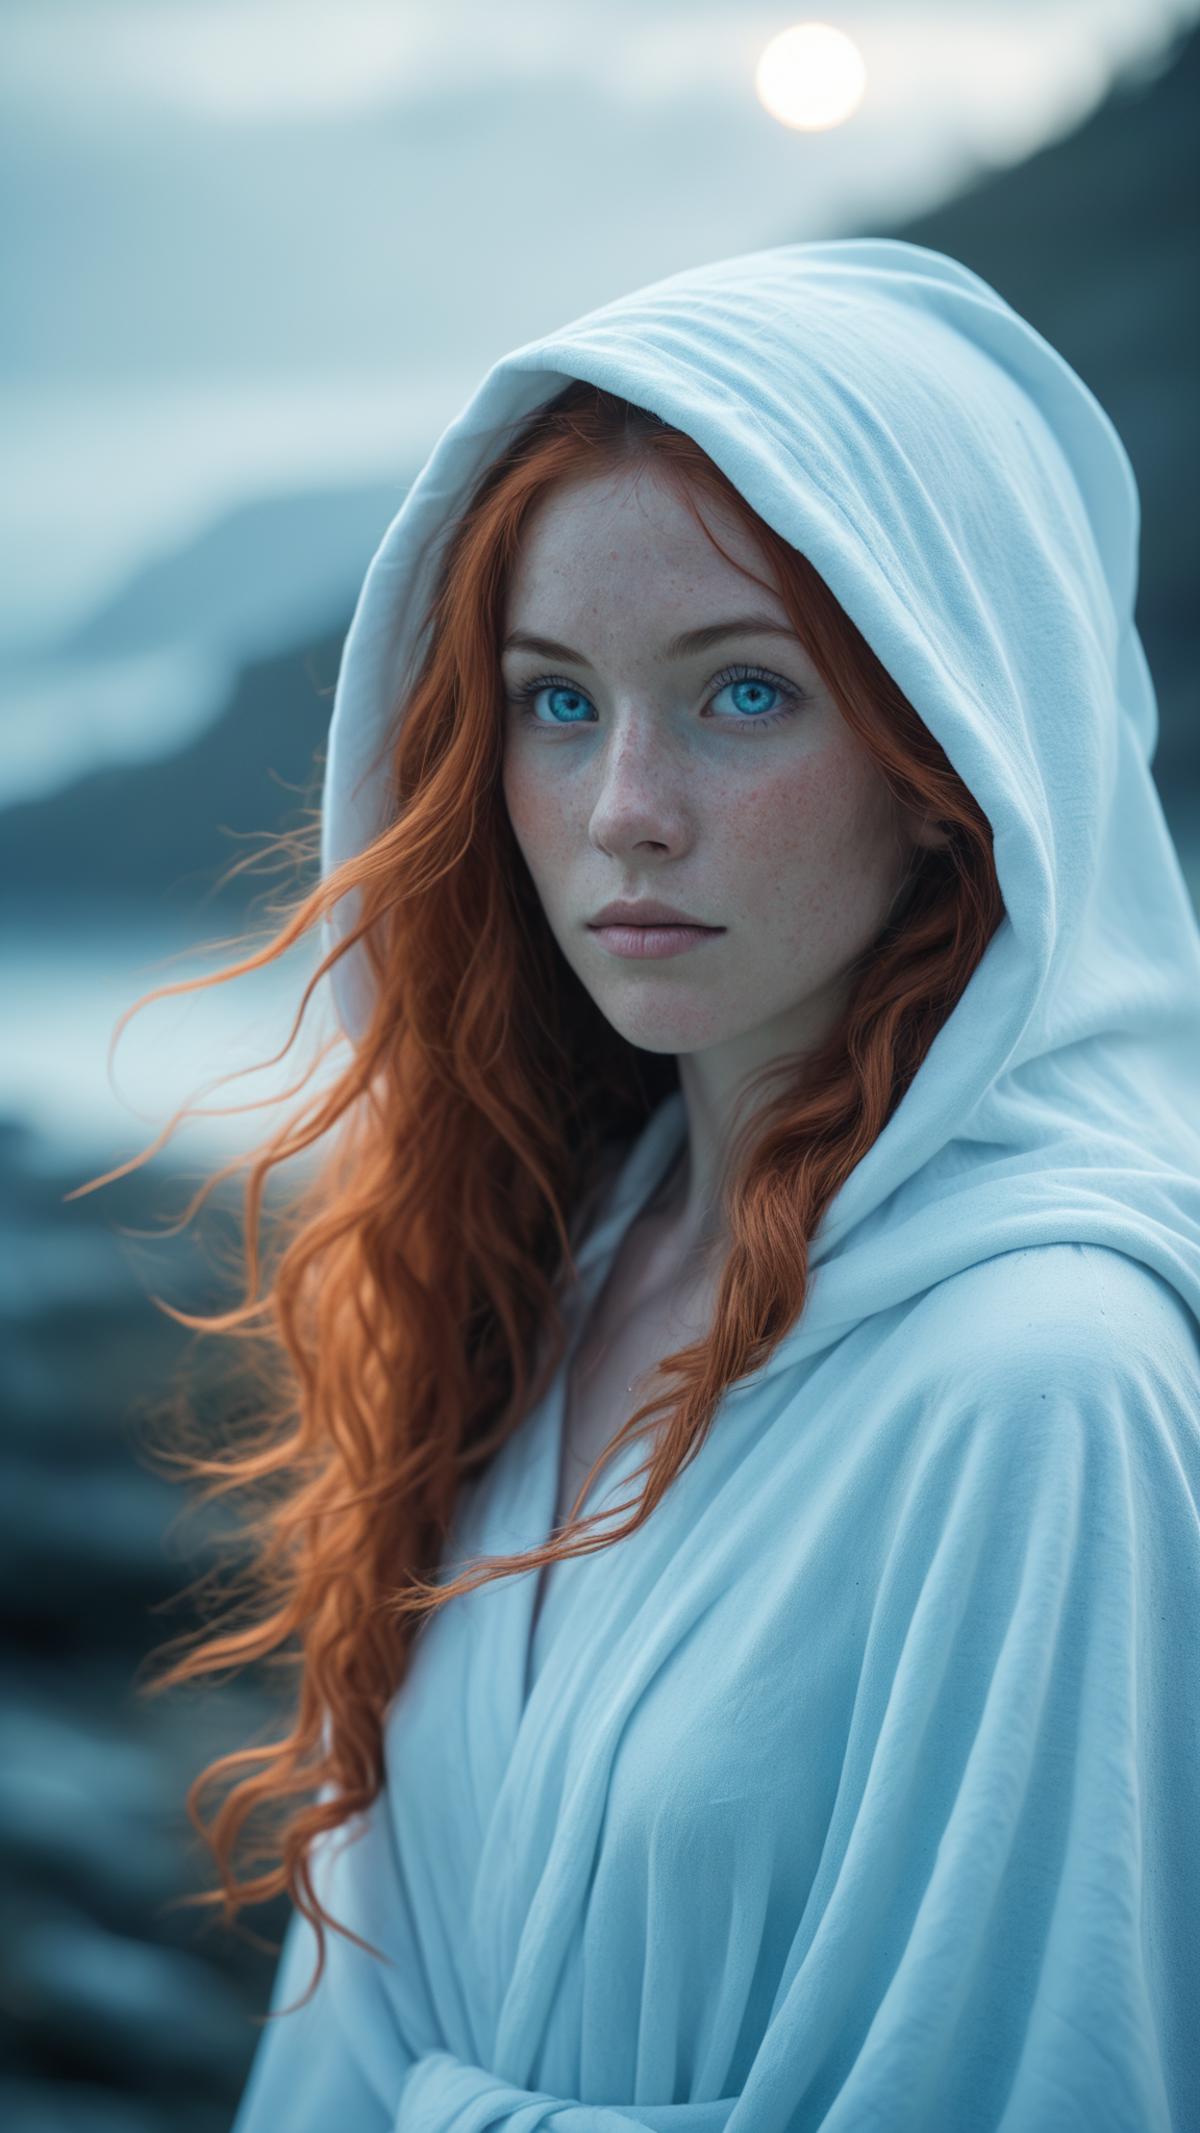 A young woman with red hair wearing a white hoodie.